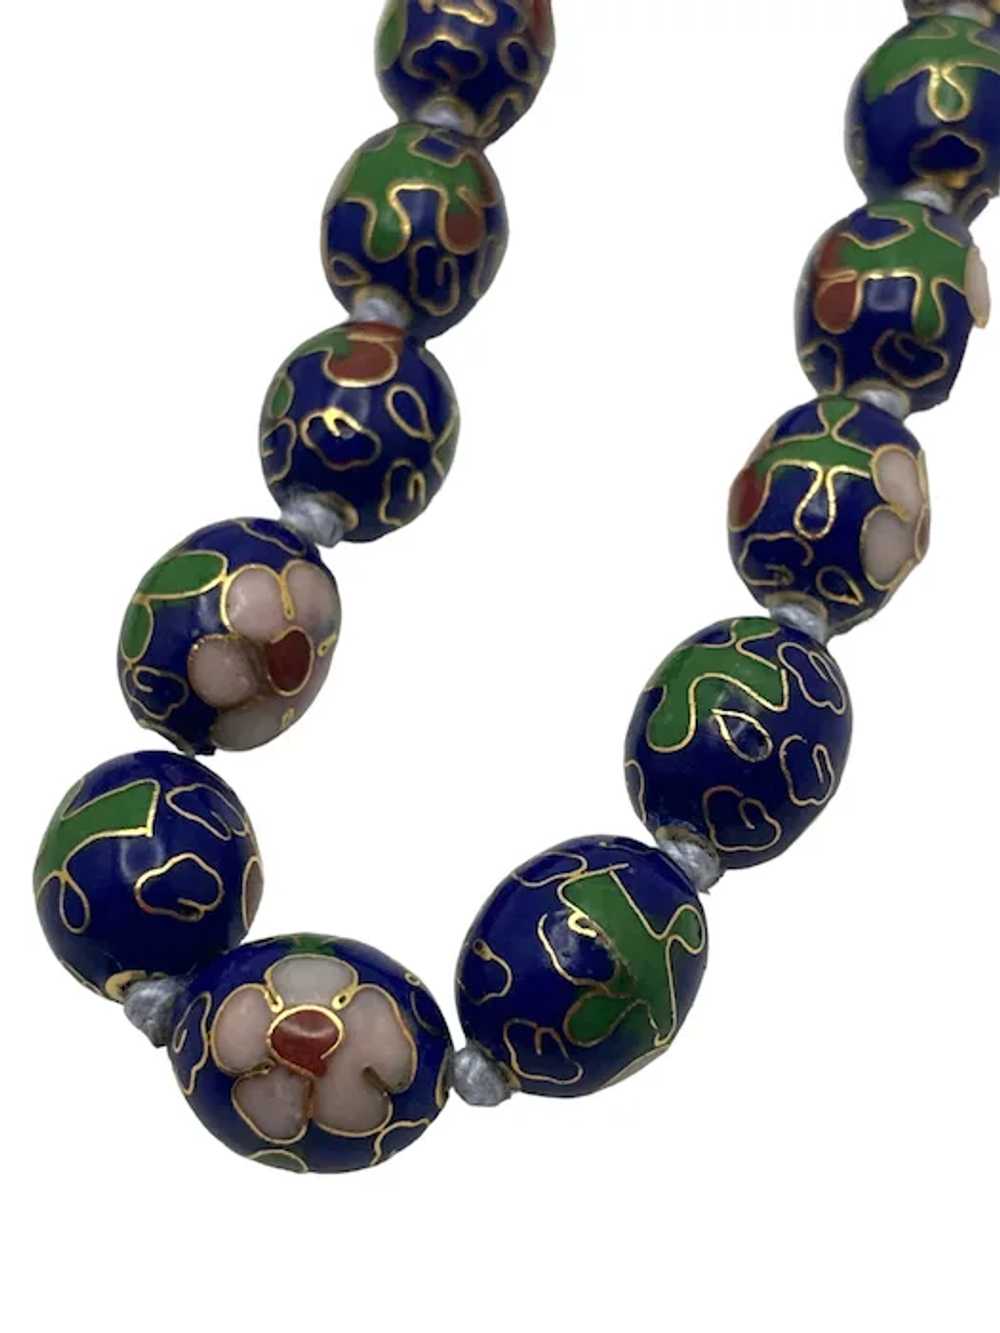 Vintage Chinese Cloisonne Oval Bead Necklace - image 7